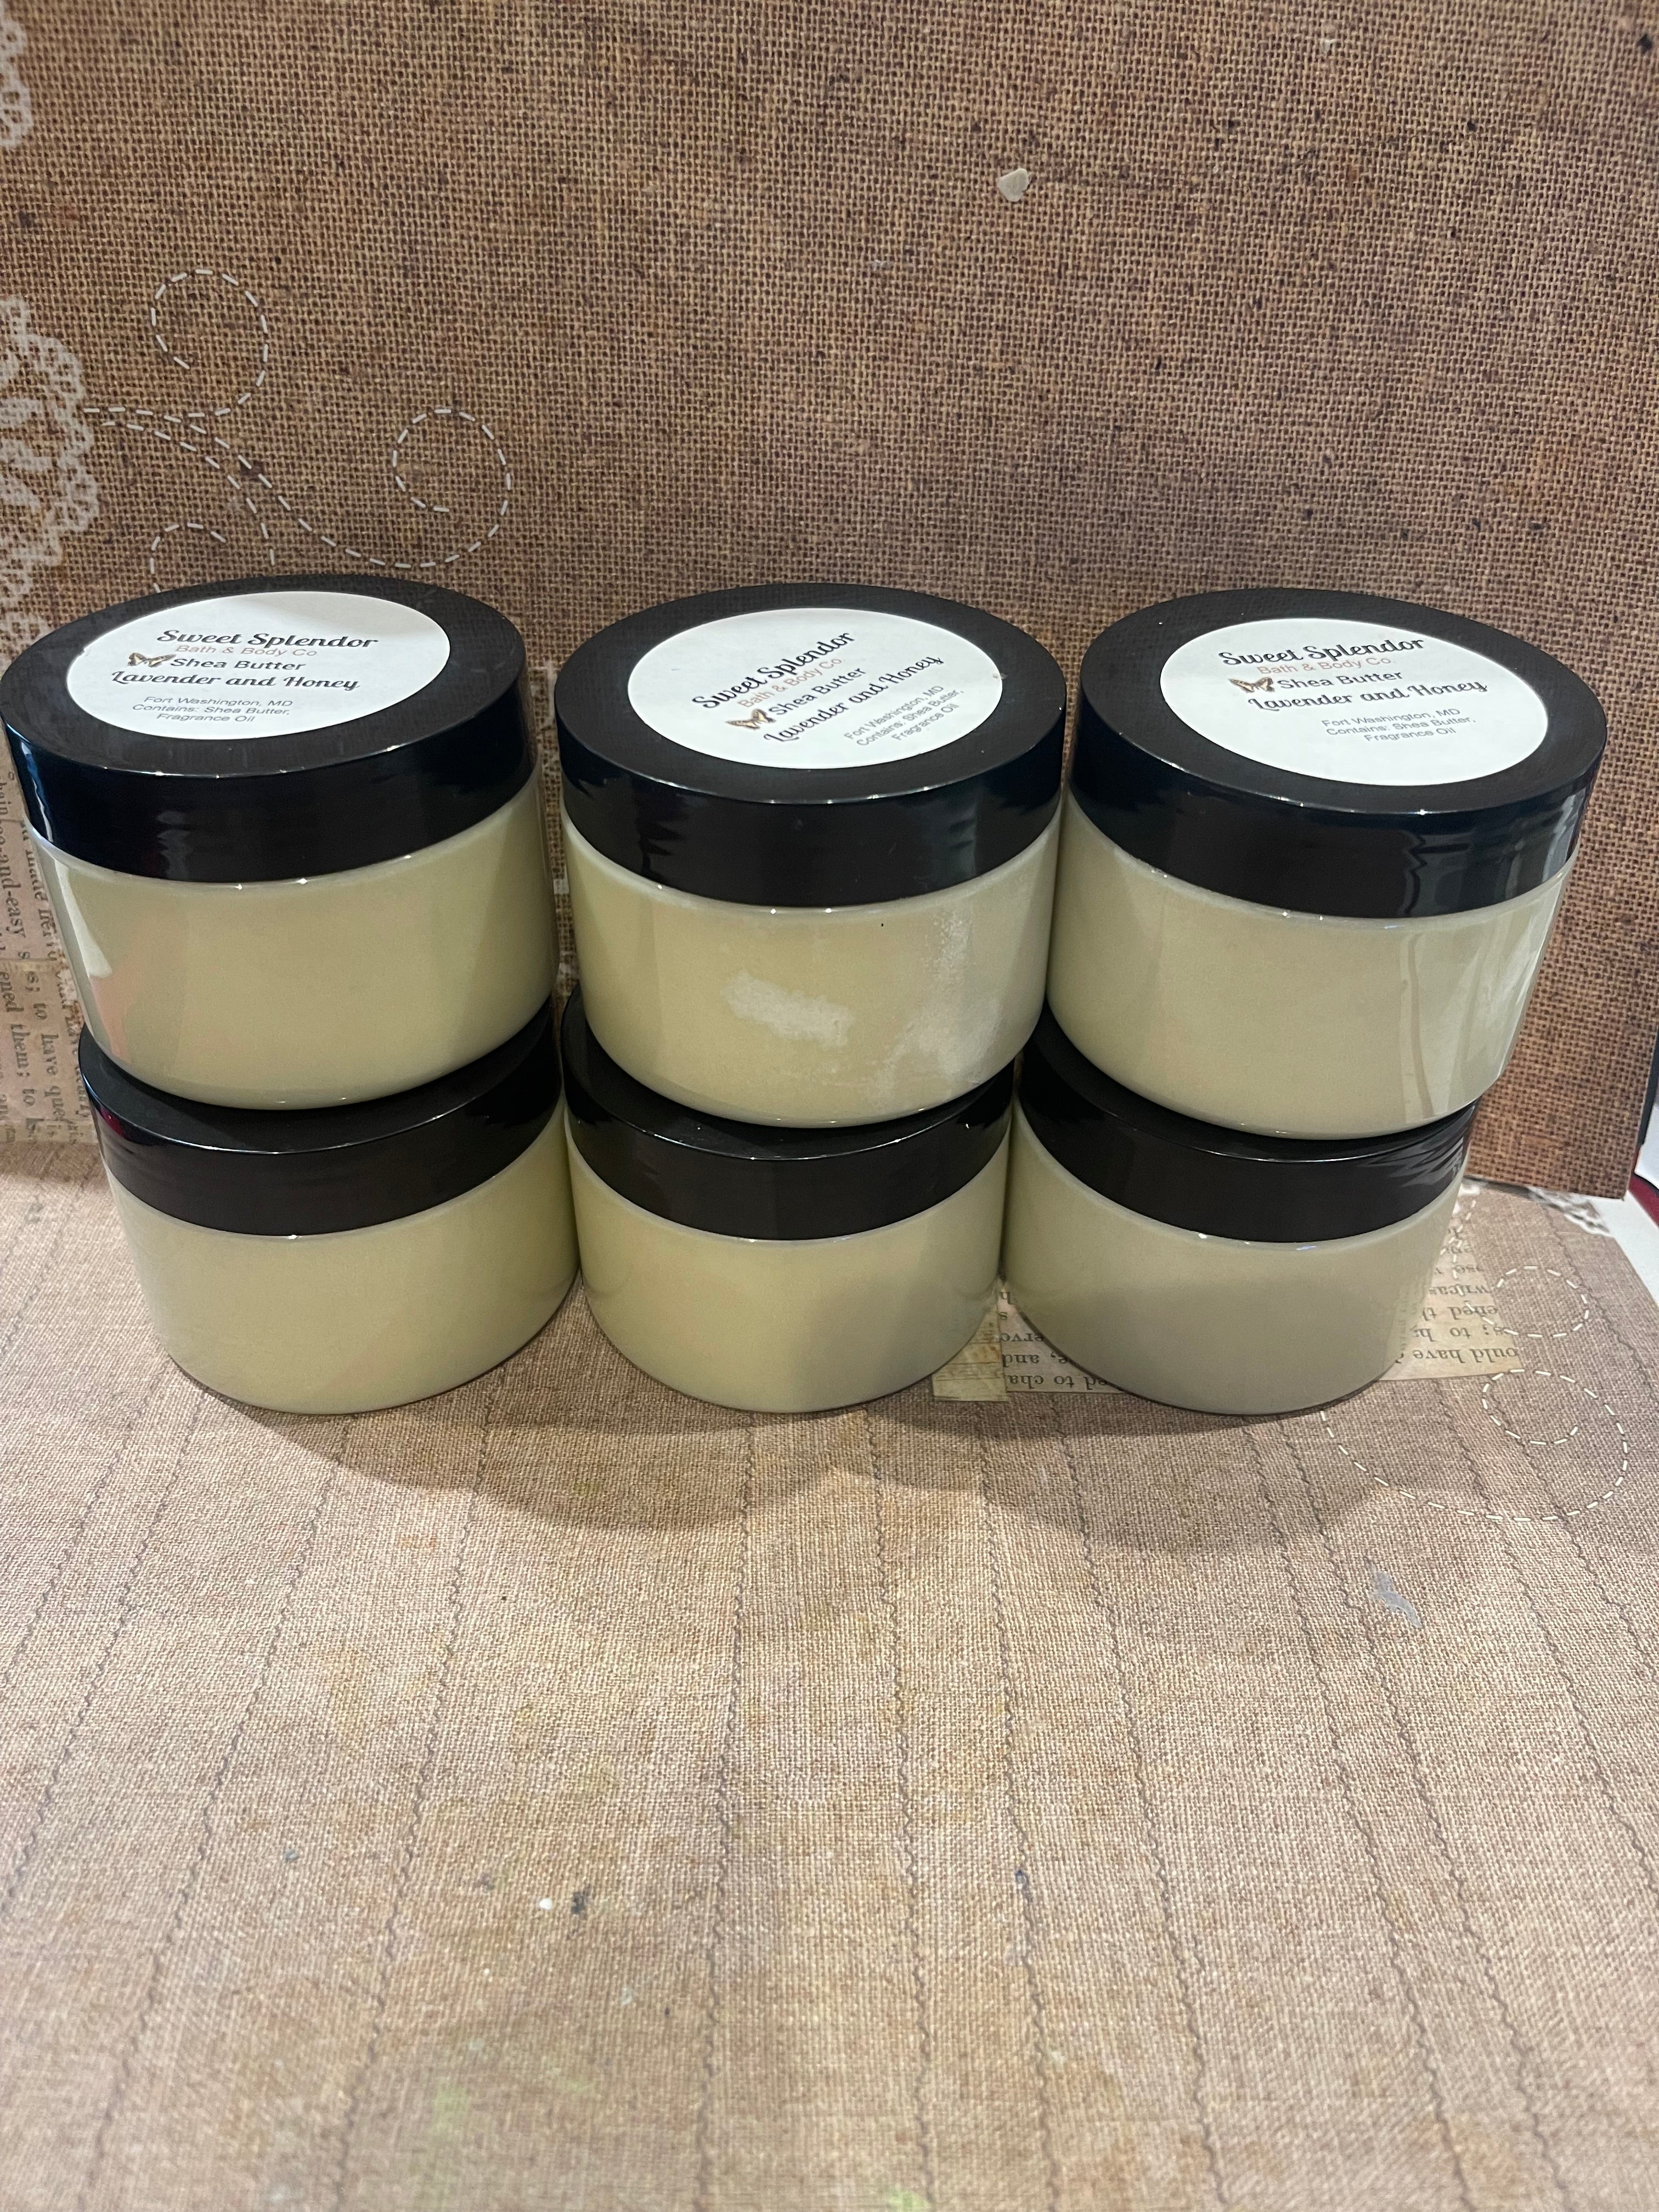 Lavender and Honey Shea Butter 4oz